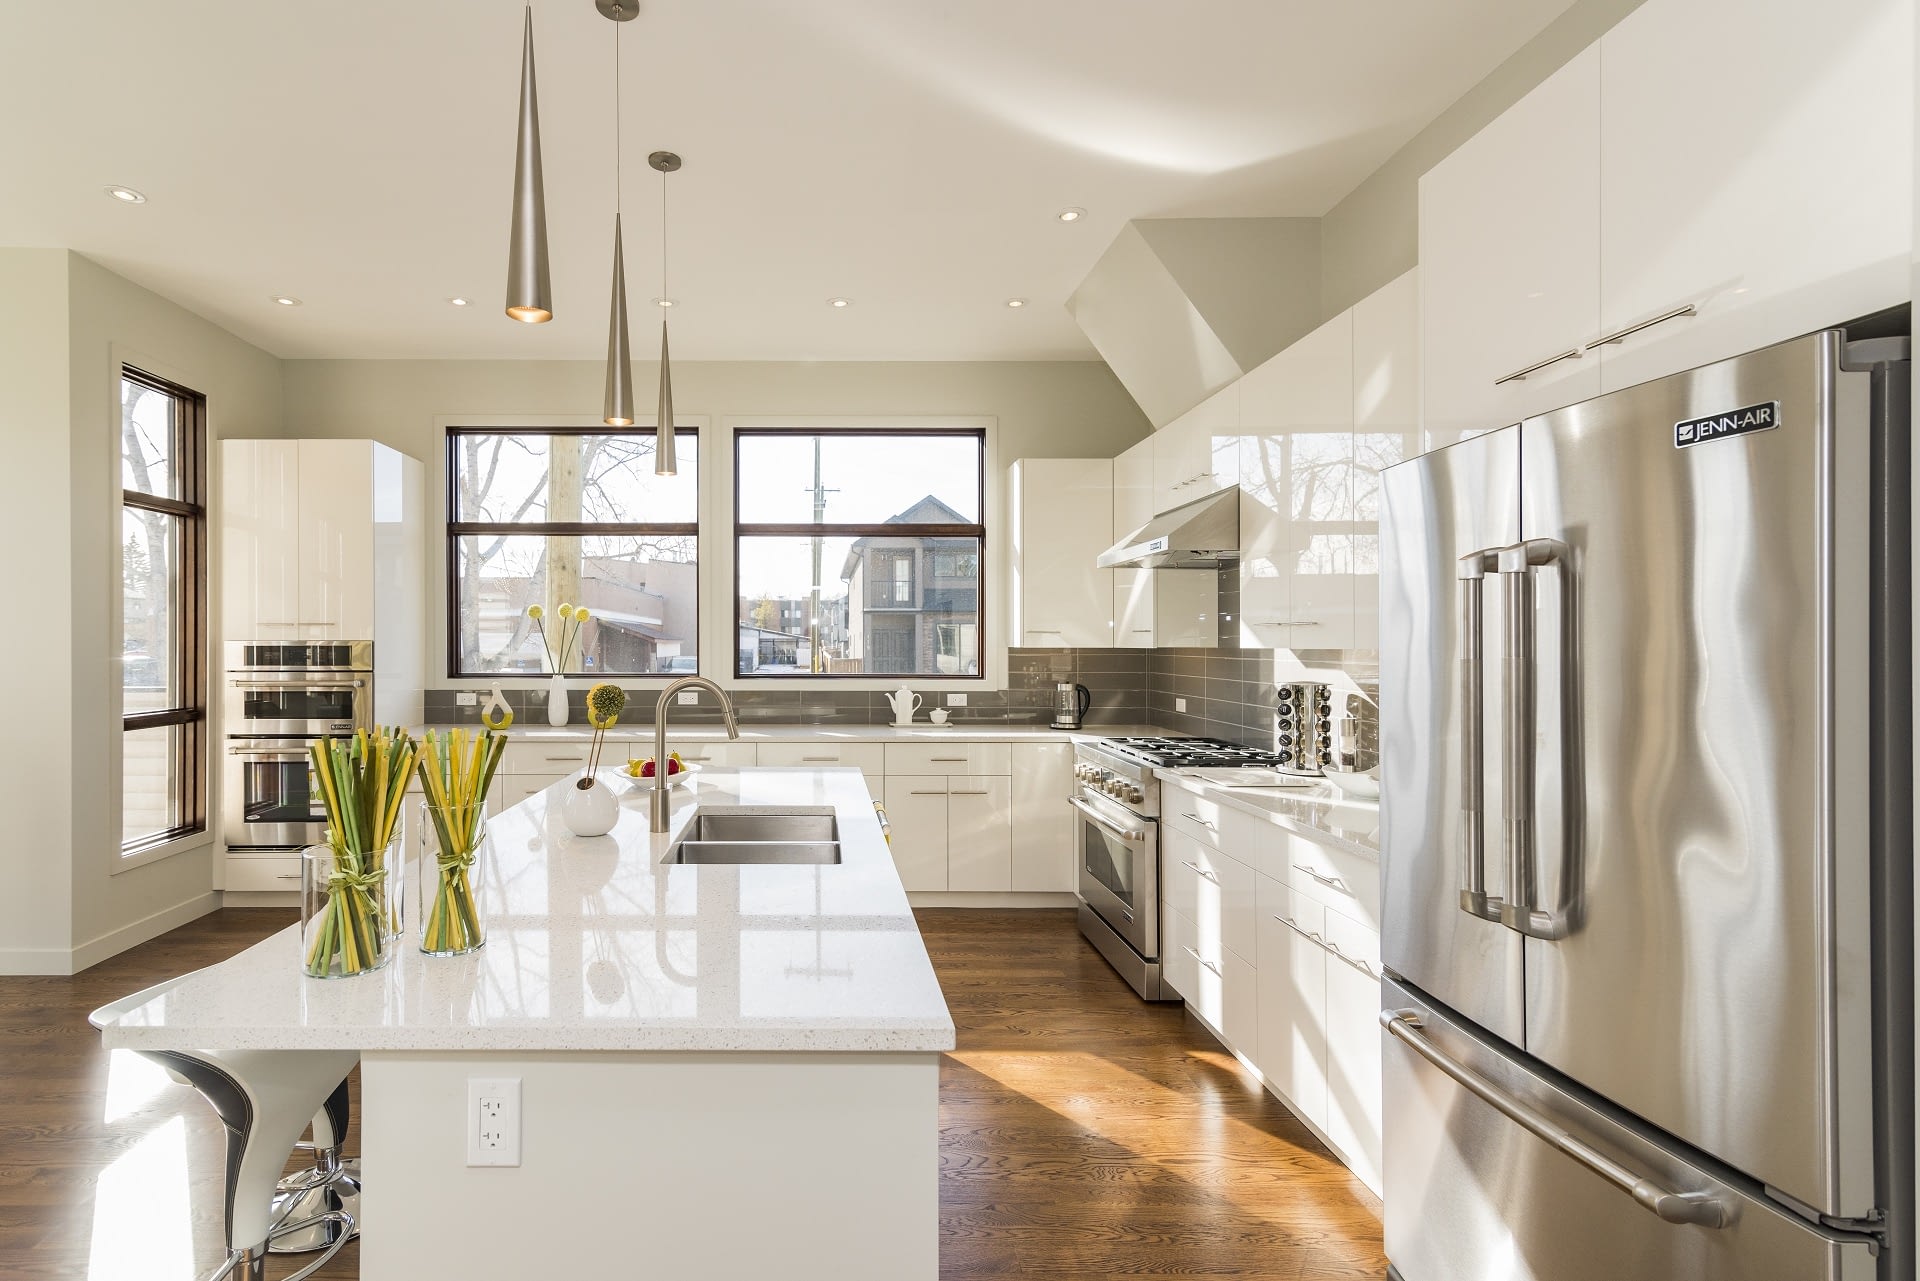 10 Important Things to Consider Before Designing a New Kitchen | Ideal